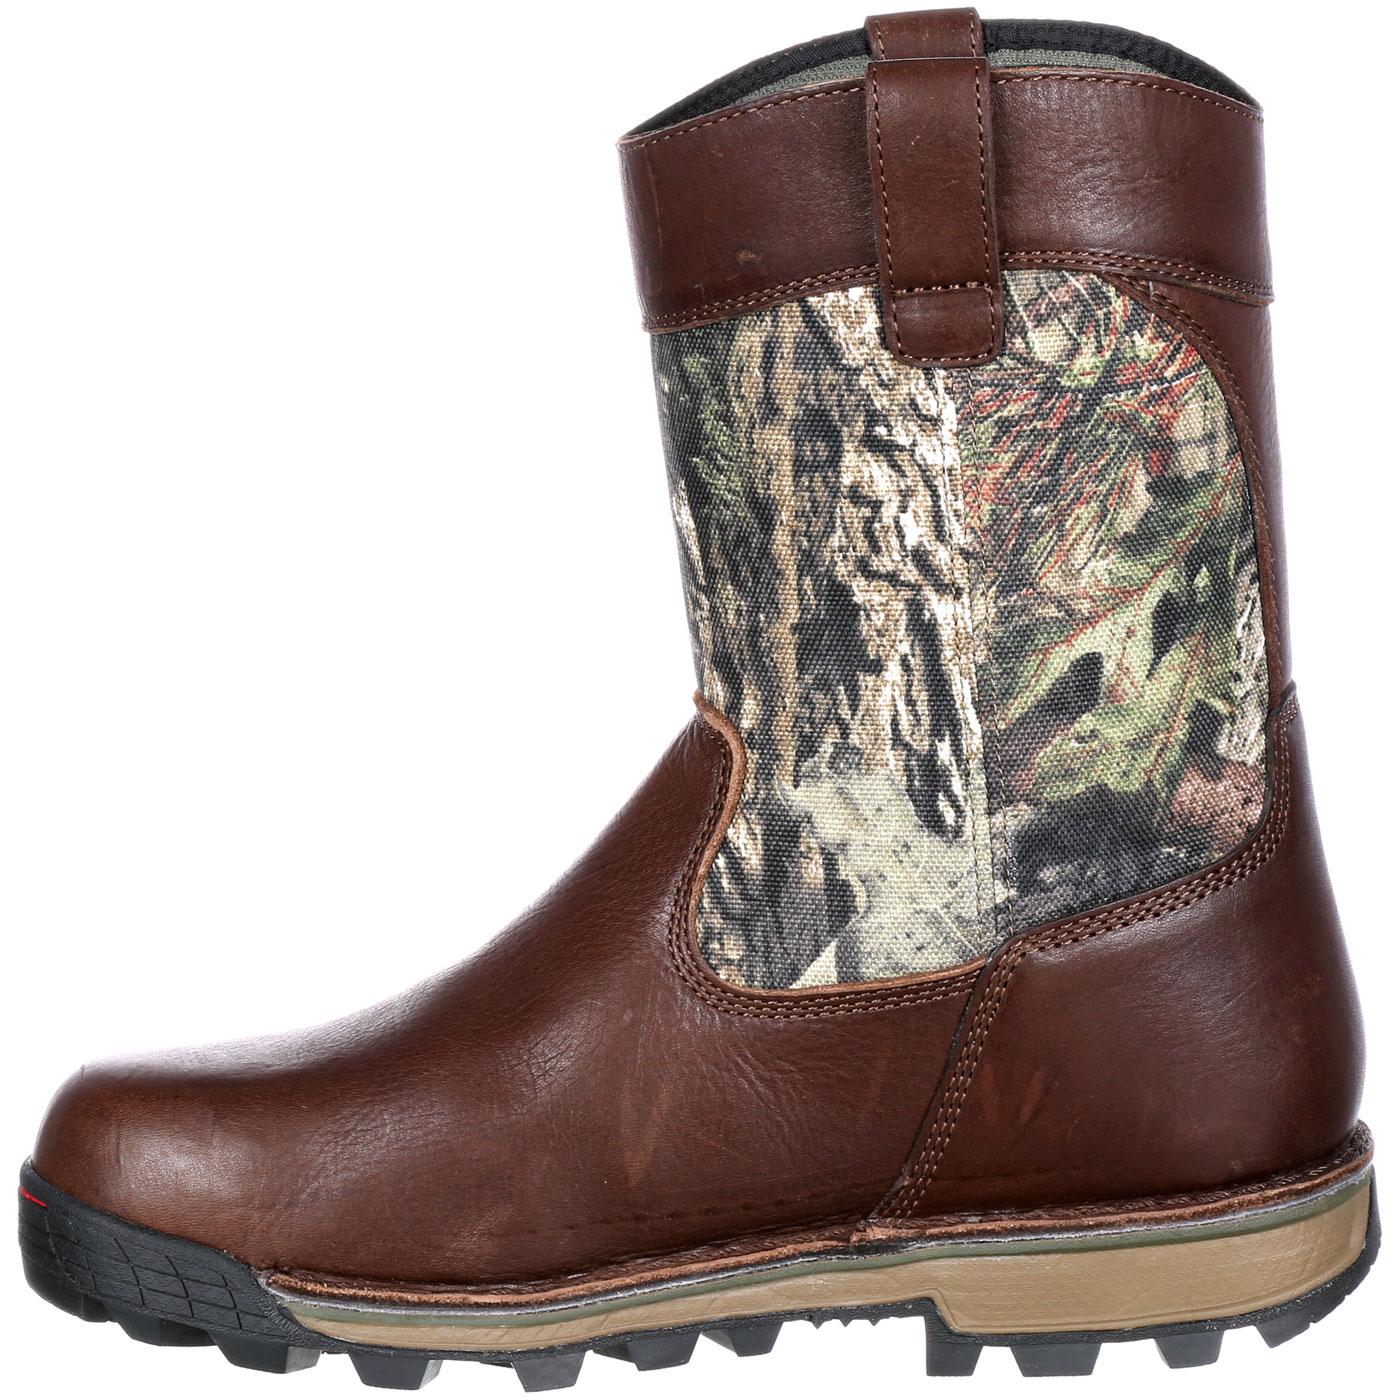 Rocky Traditions: Camo Waterproof Insulated Wellington Boot